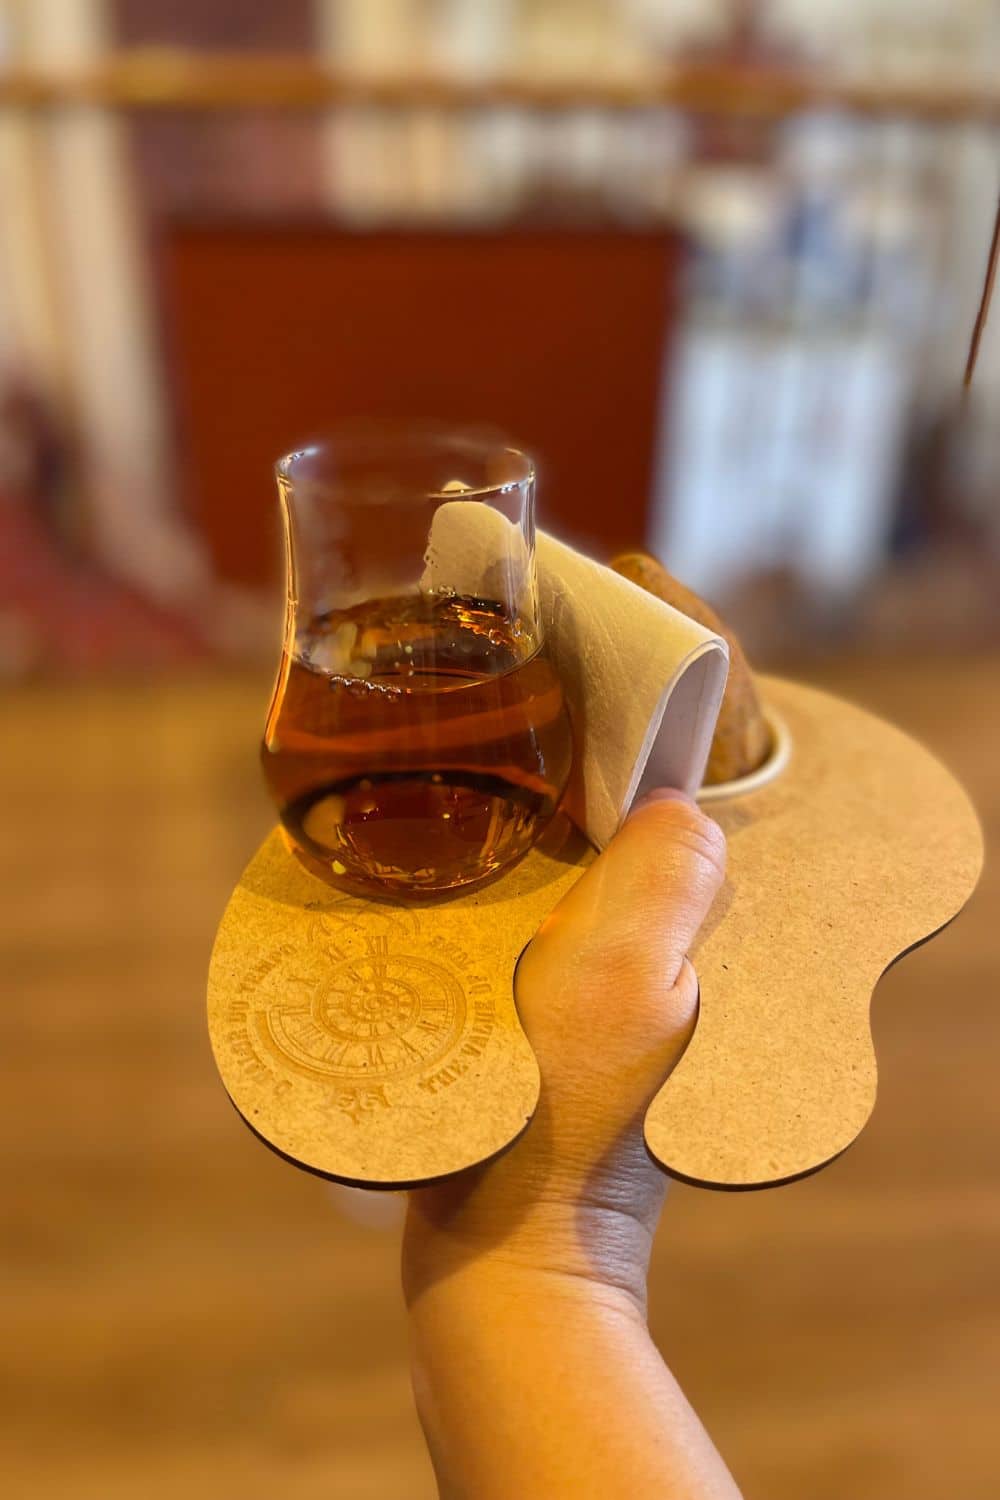 A hand holding a glass of amber-colored port wine with a coaster, set against a blurred background of a wine cellar's interior.